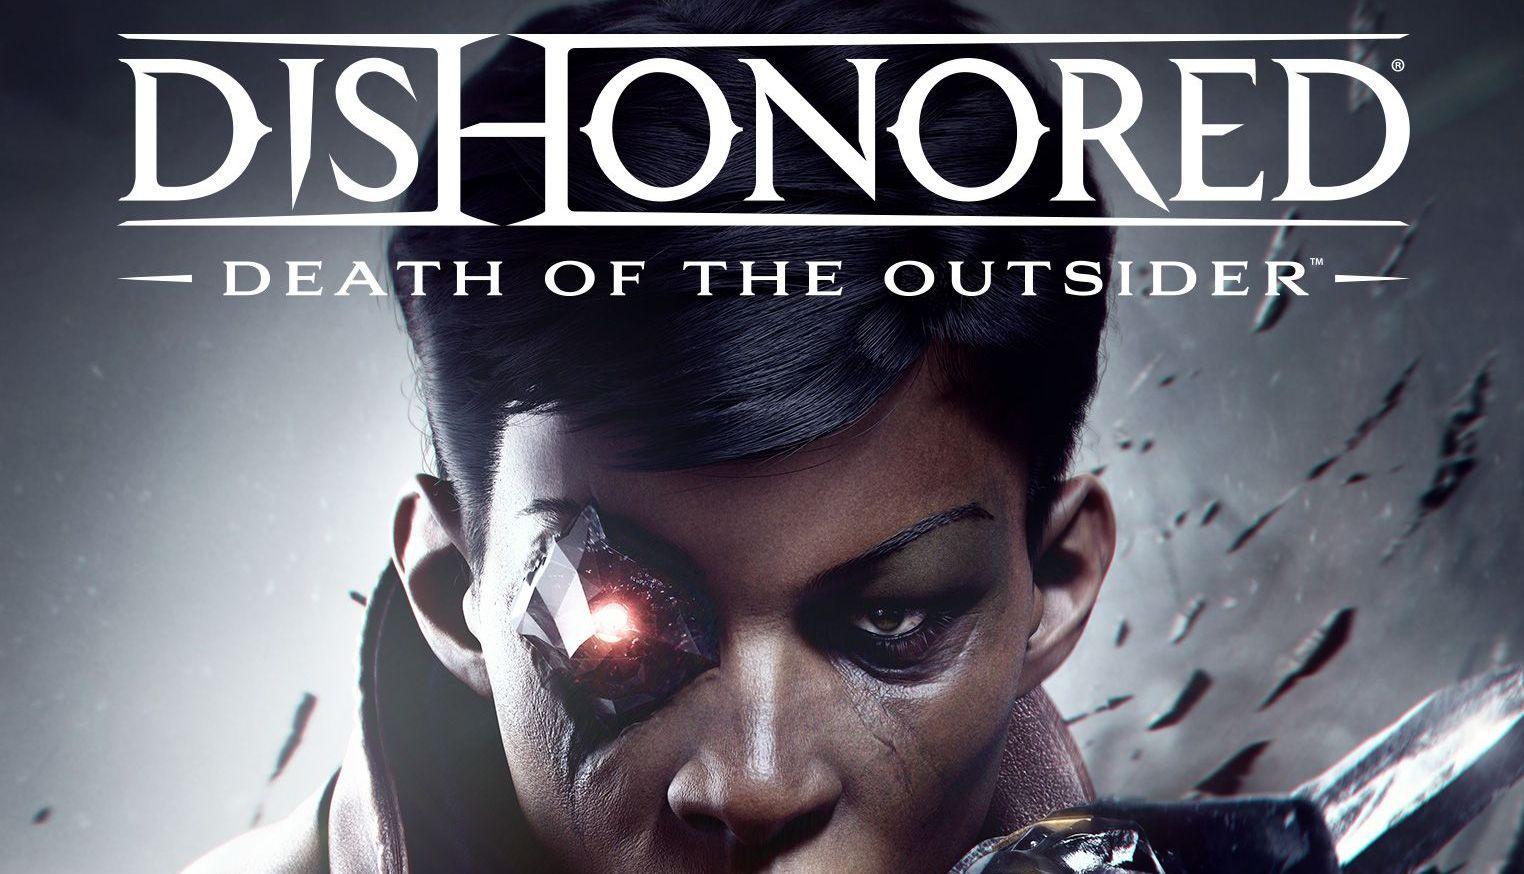 Dishonored: Death of the Outsider Gets First Screenshots, Box Art